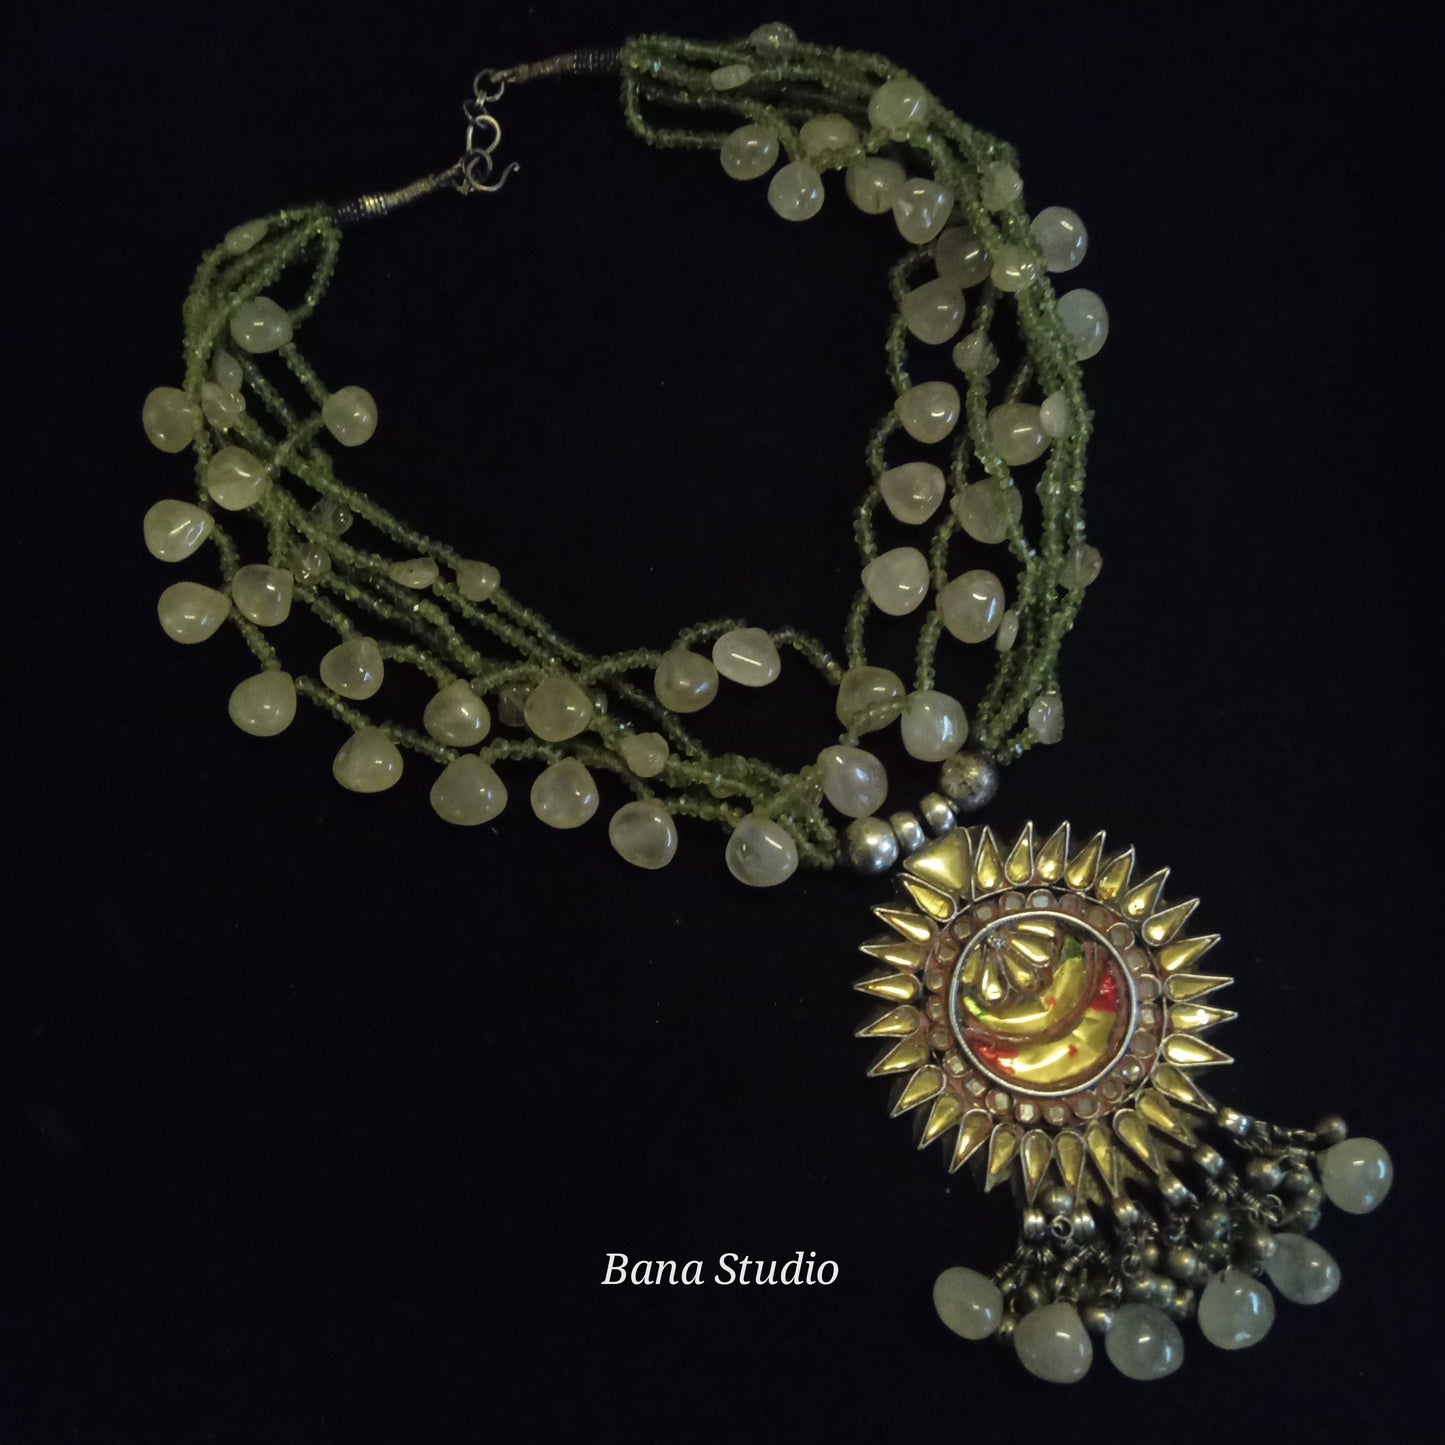 Made up Necklace